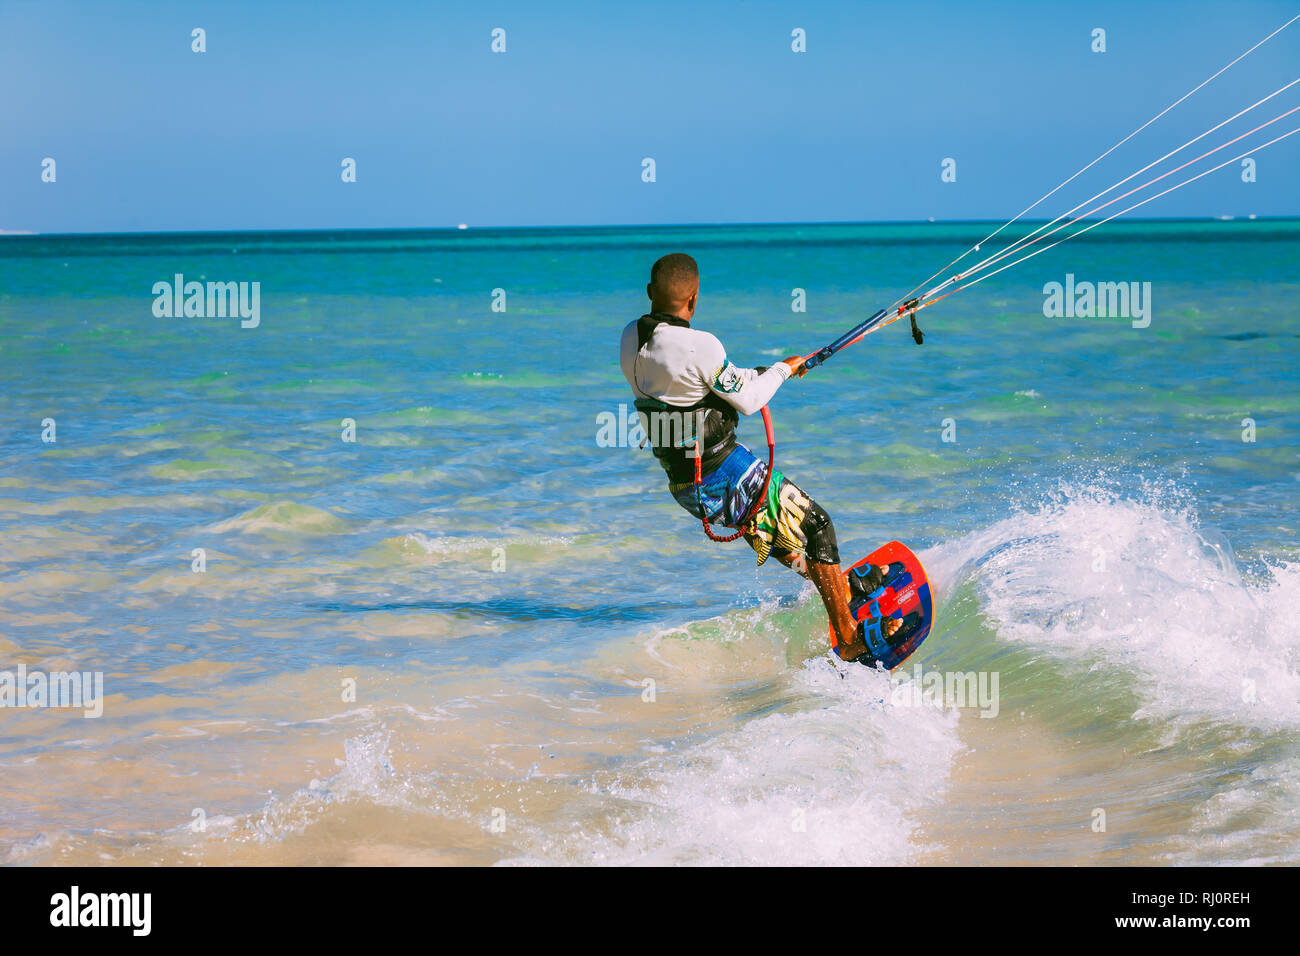 Egypt, Hurghada - 30 November, 2017: Close-up rear view of the surfer on the surfboard holding the kite straps. The wave riding over the crystal clear Red sea surface. Overwhelming marine landscape. Stock Photo